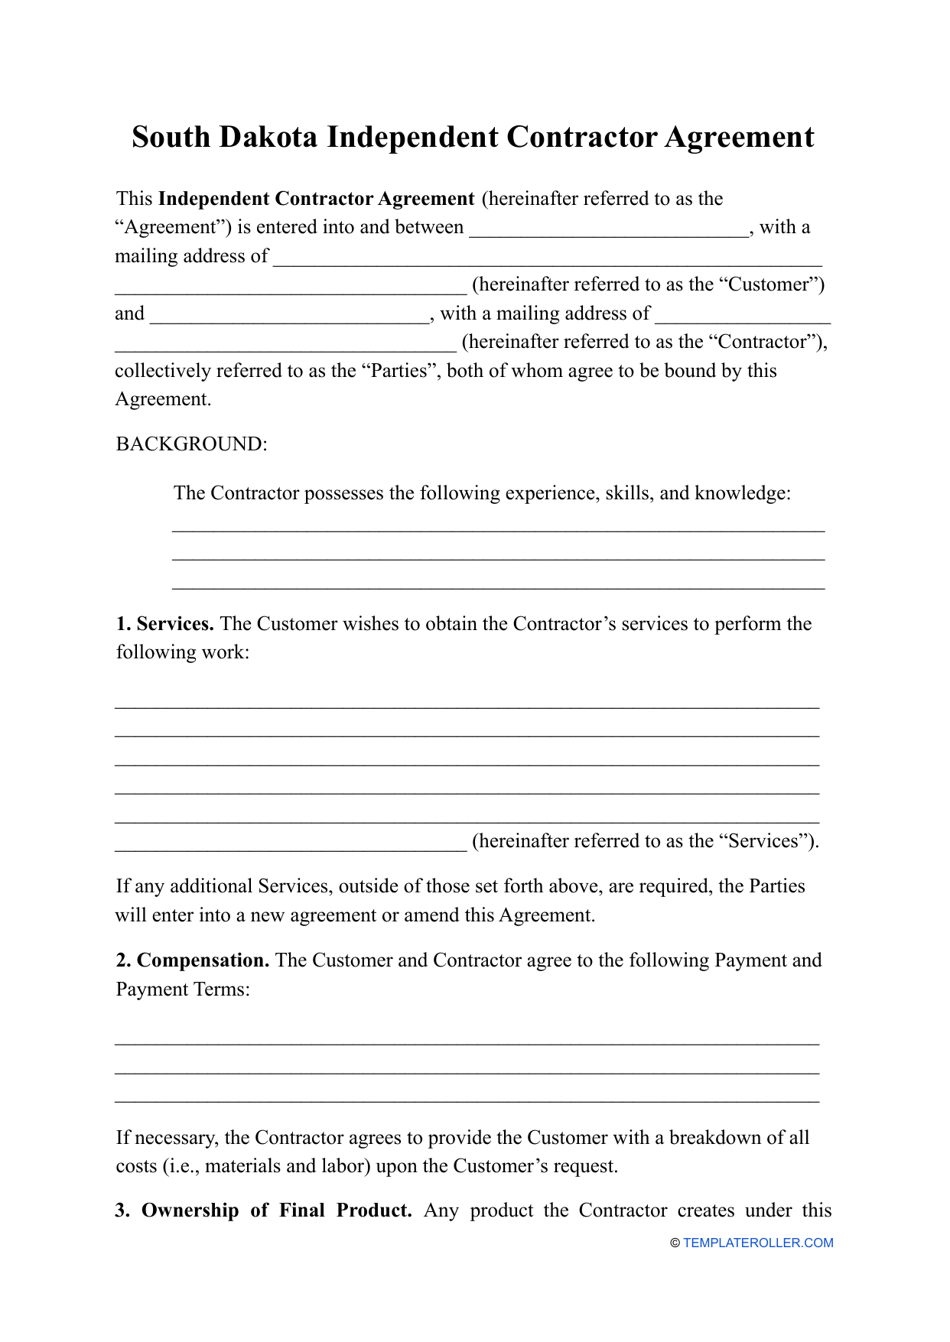 Independent Contractor Agreement Template - South Dakota, Page 1